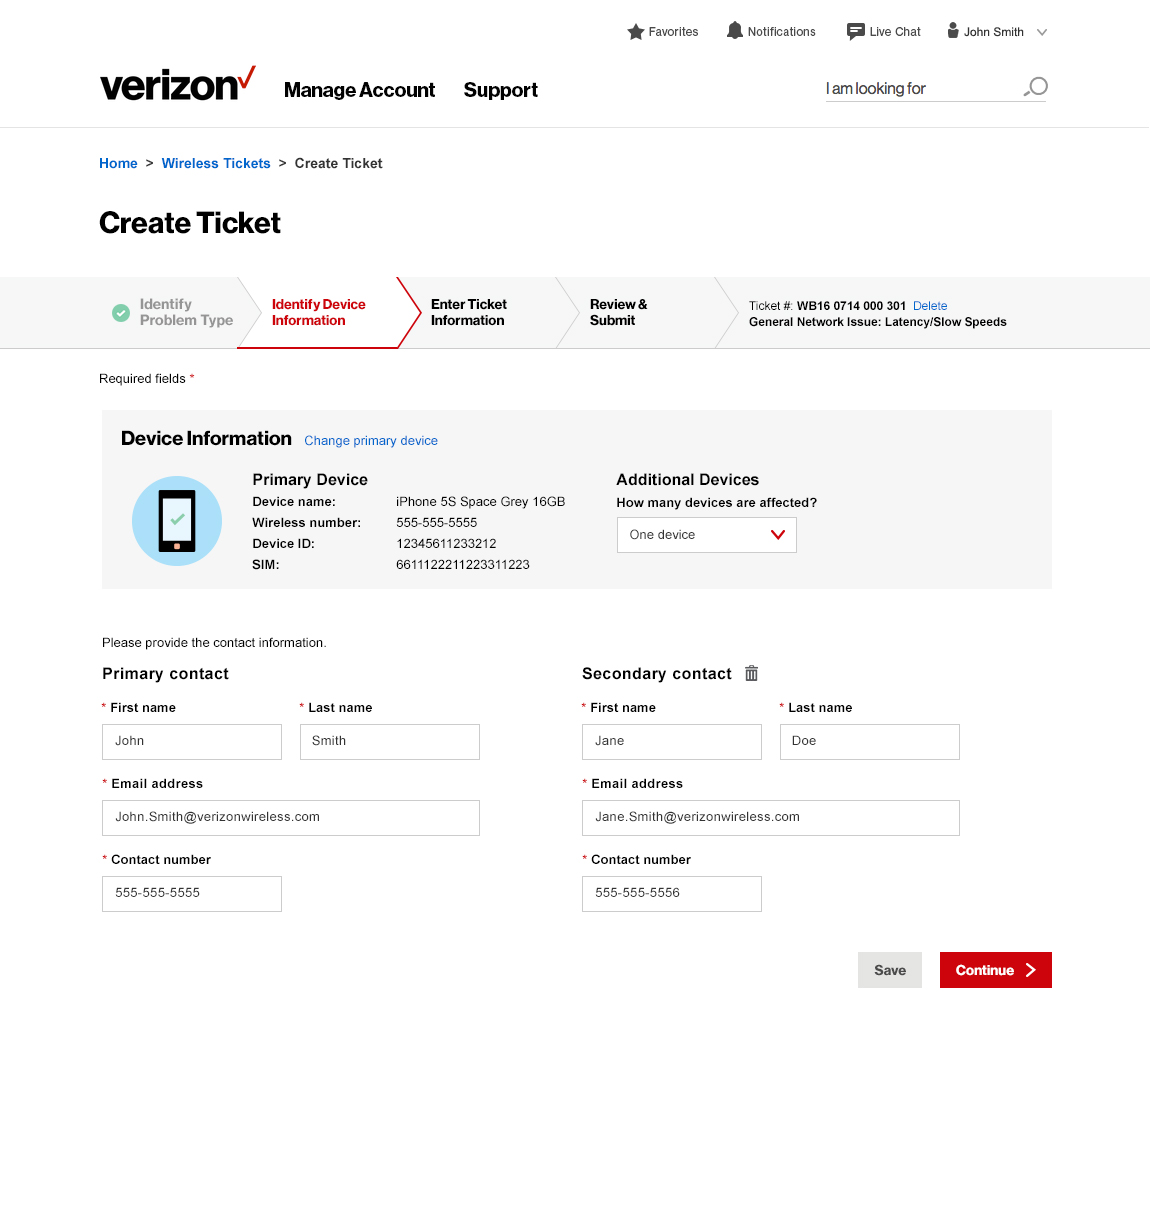 Device validation will help the Verizon Helpdesk resolve the issue.